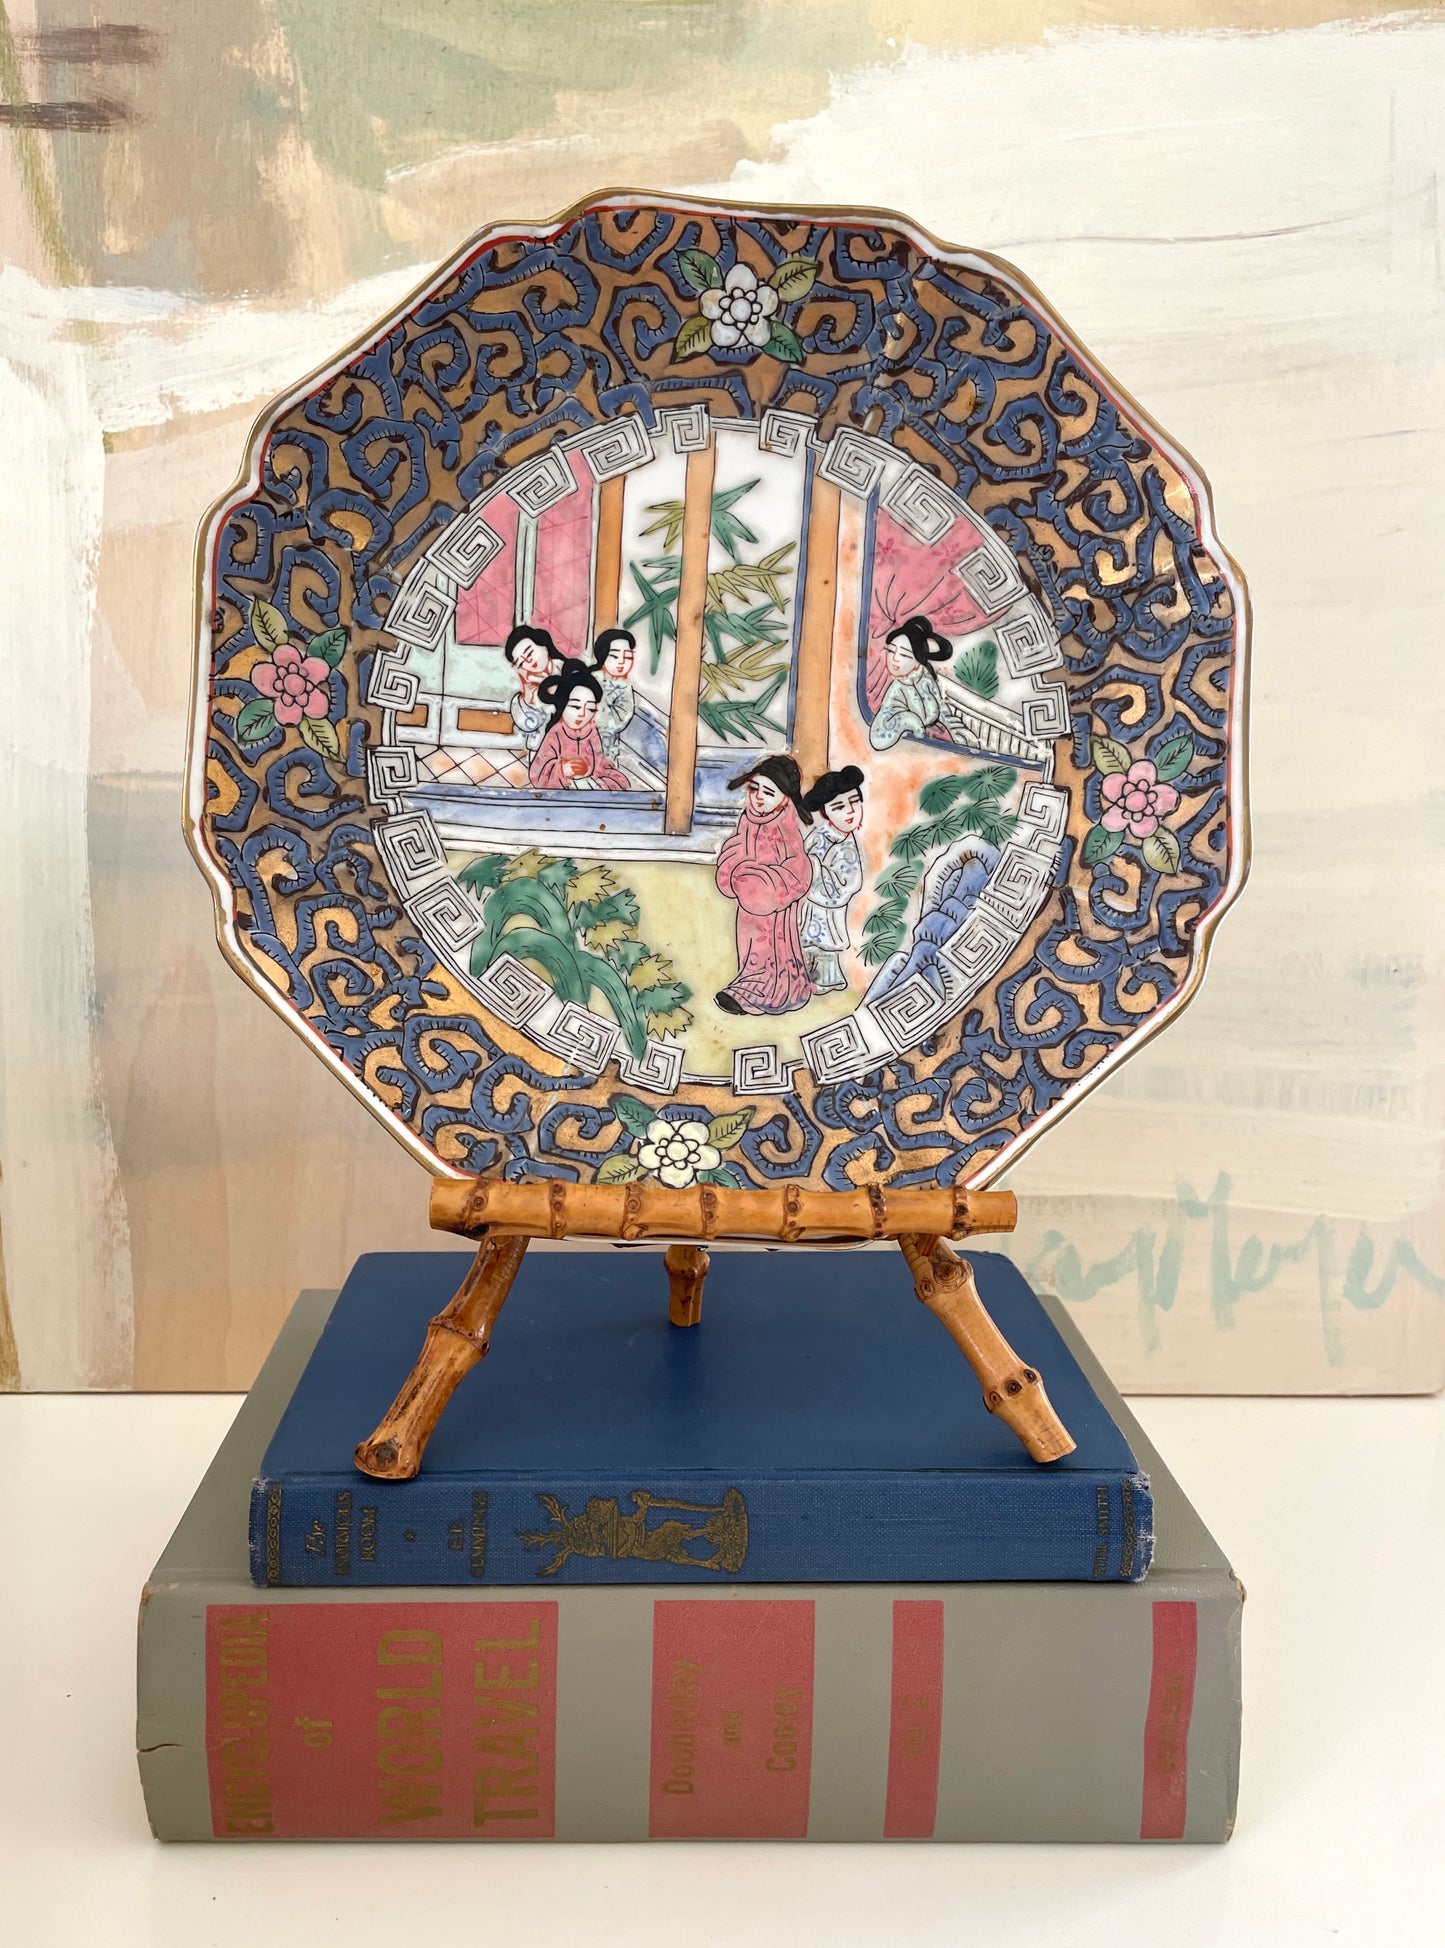 Antique Chinoiserie Plate